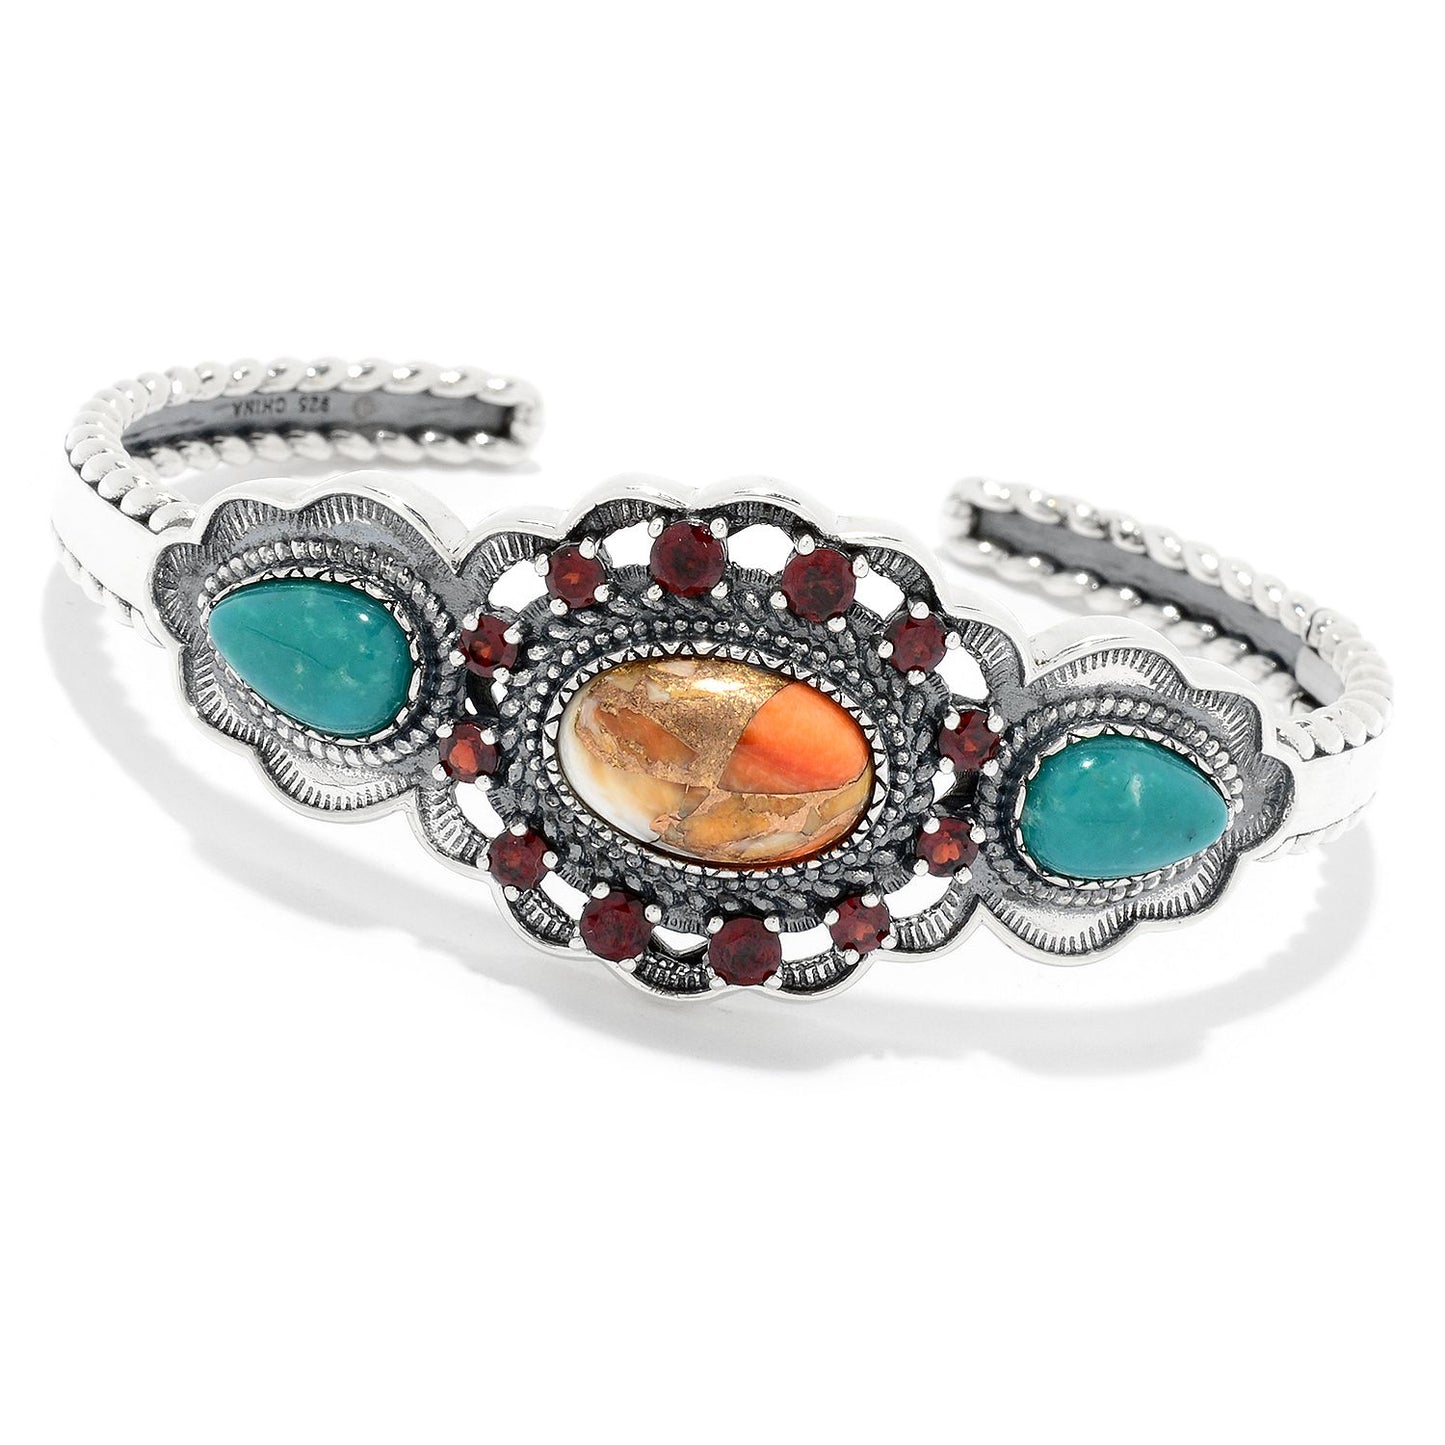 925 Sterling Silver CampoFrio Turquoise,Red Garnet,Orange Spiny Bangle